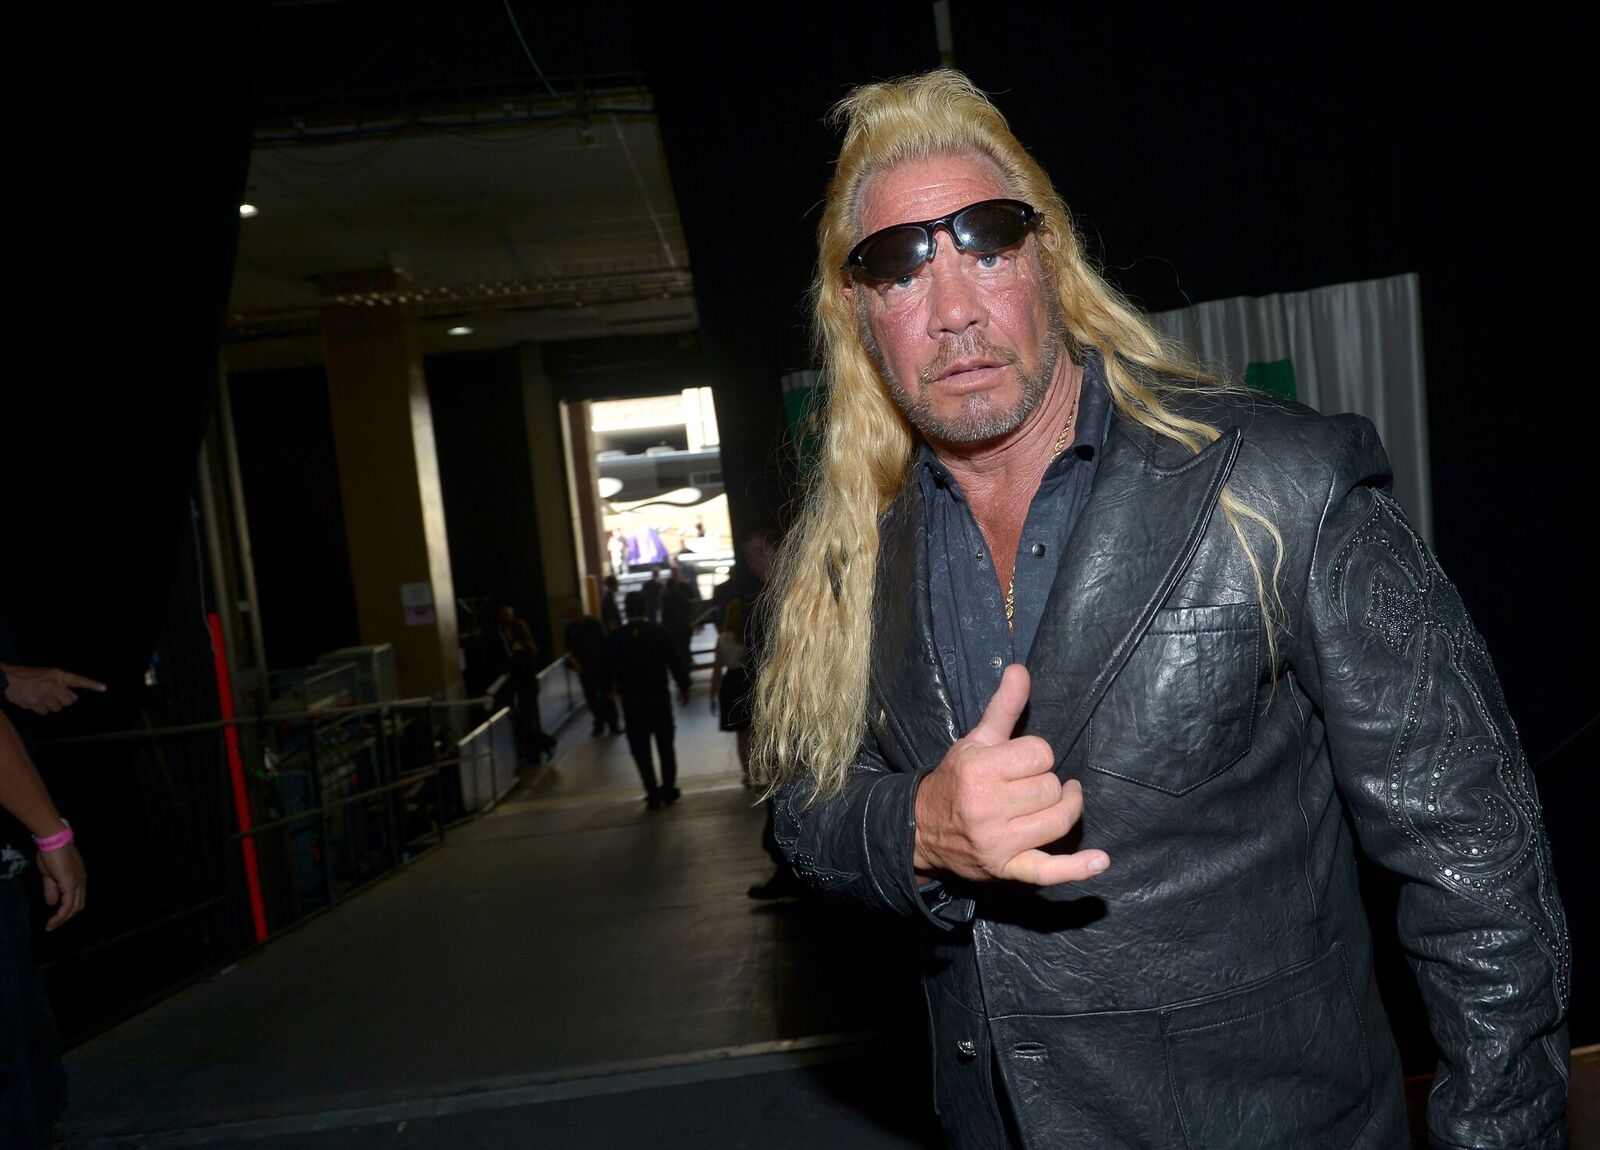 TV personality Dog the Bounty Hunter attends the 48th Annual Academy of Country Music Awards at the MGM Grand Garden Arena on April 7, 2013 | Photo: Getty Images